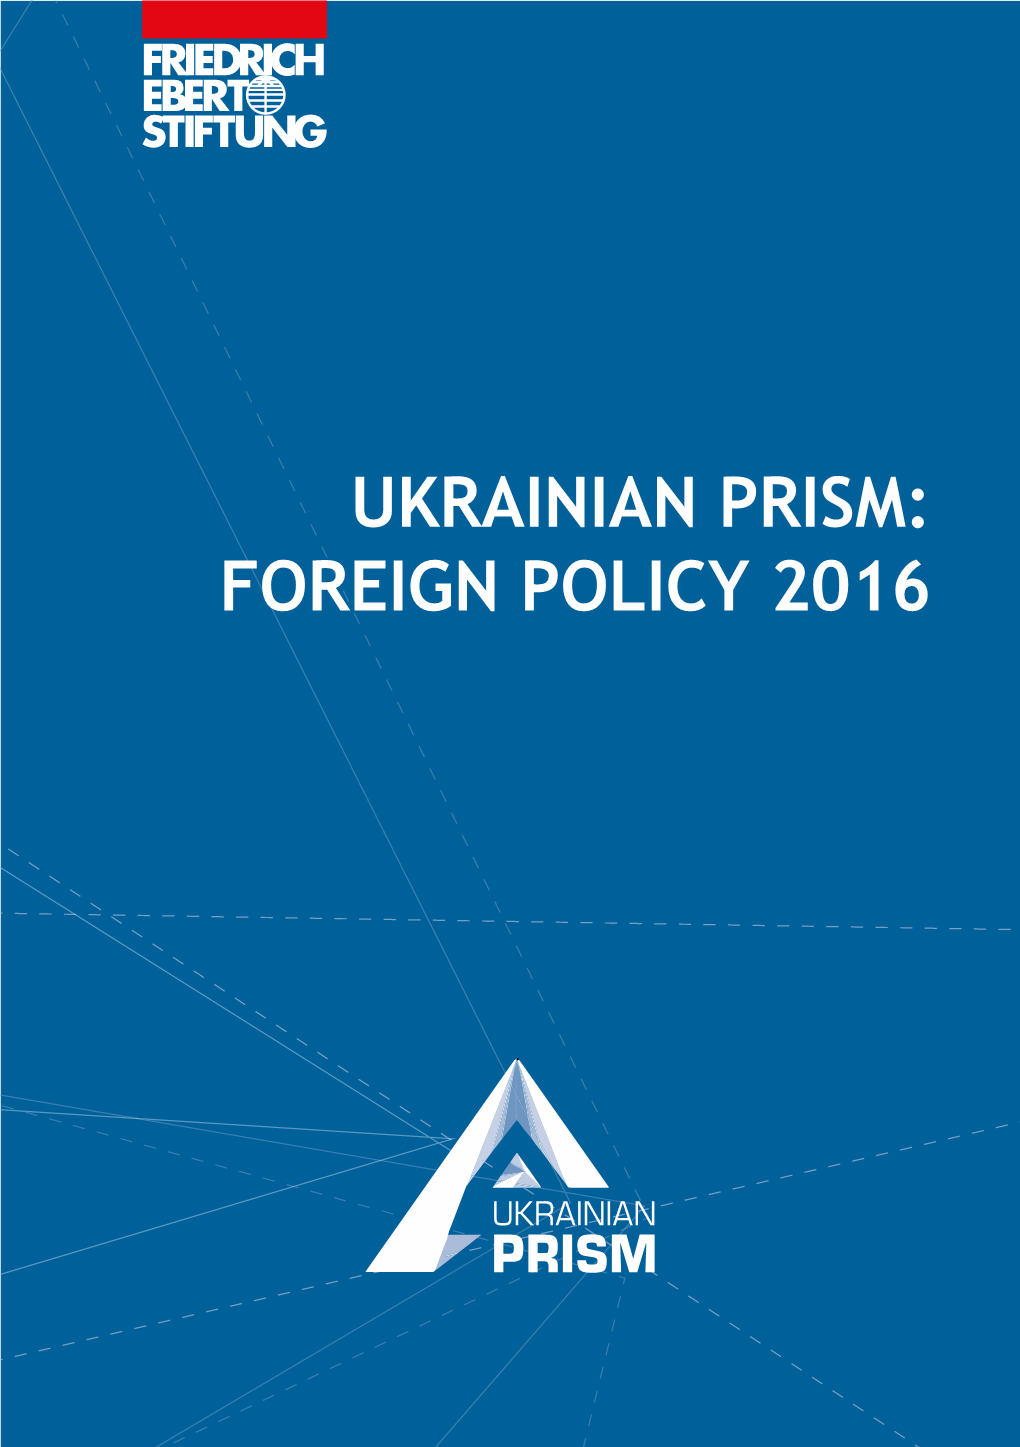 Ukrainian Prism: Foreign Policy 2016 Ukrainian Prism: Foreign Policy 2016